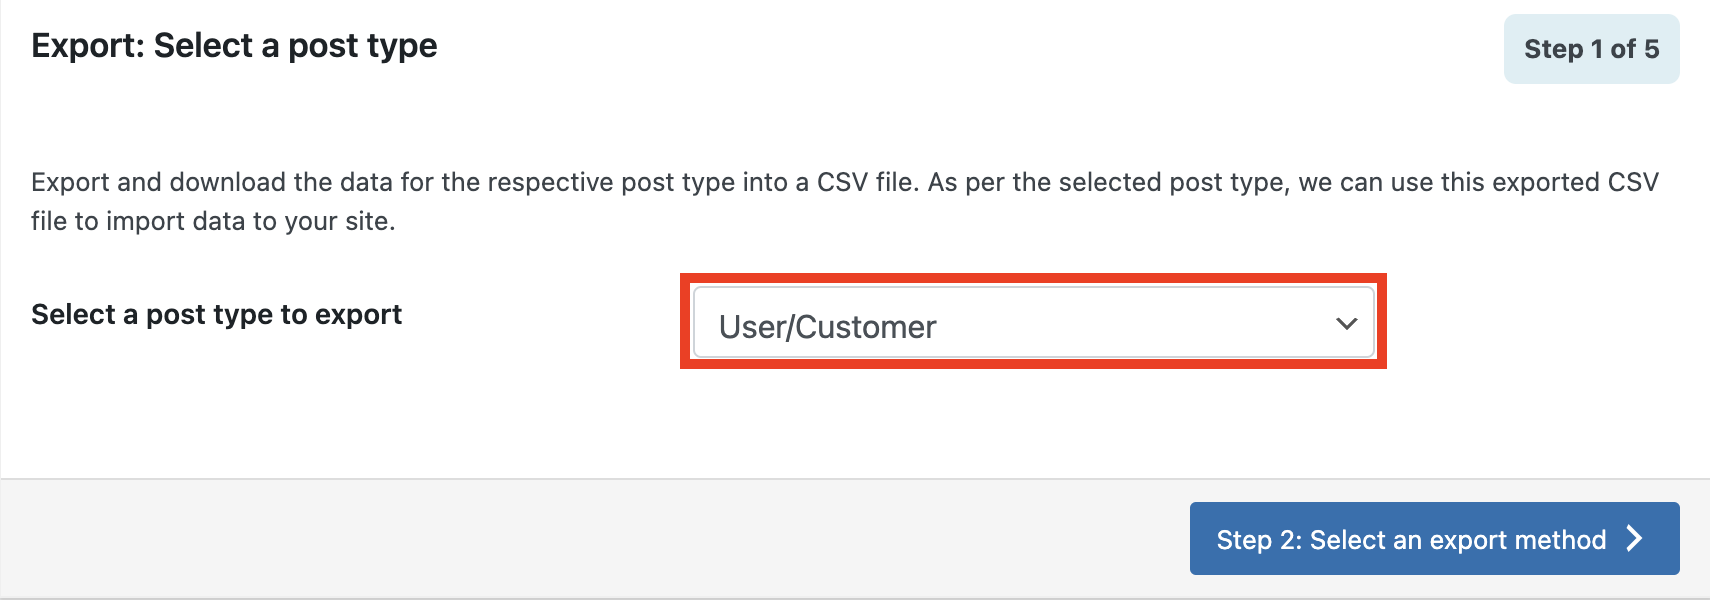 Select User as the post type to export